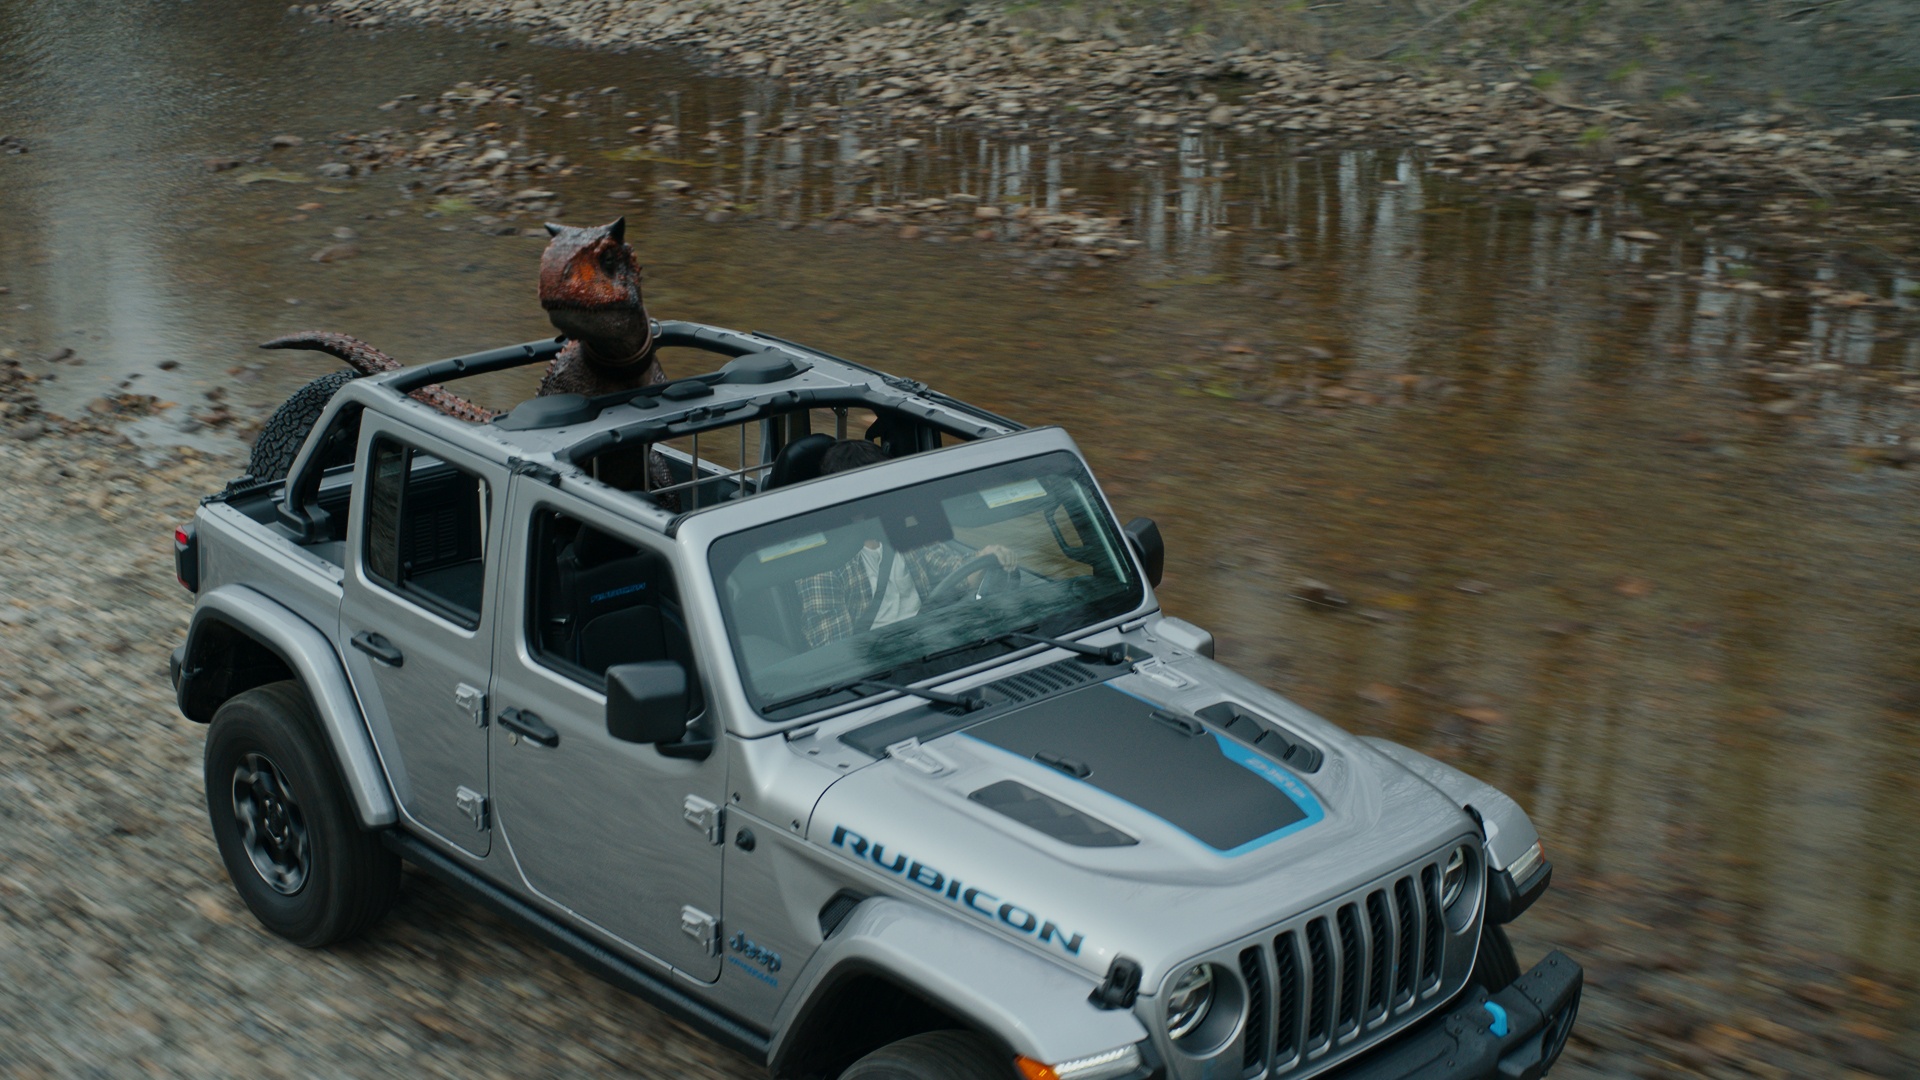 JEEP BRAND PARTNERS WITH UNIVERSAL PICTURES TO LAUNCH 'JURASSIC WORLD DOMINION' THIS SUMMER